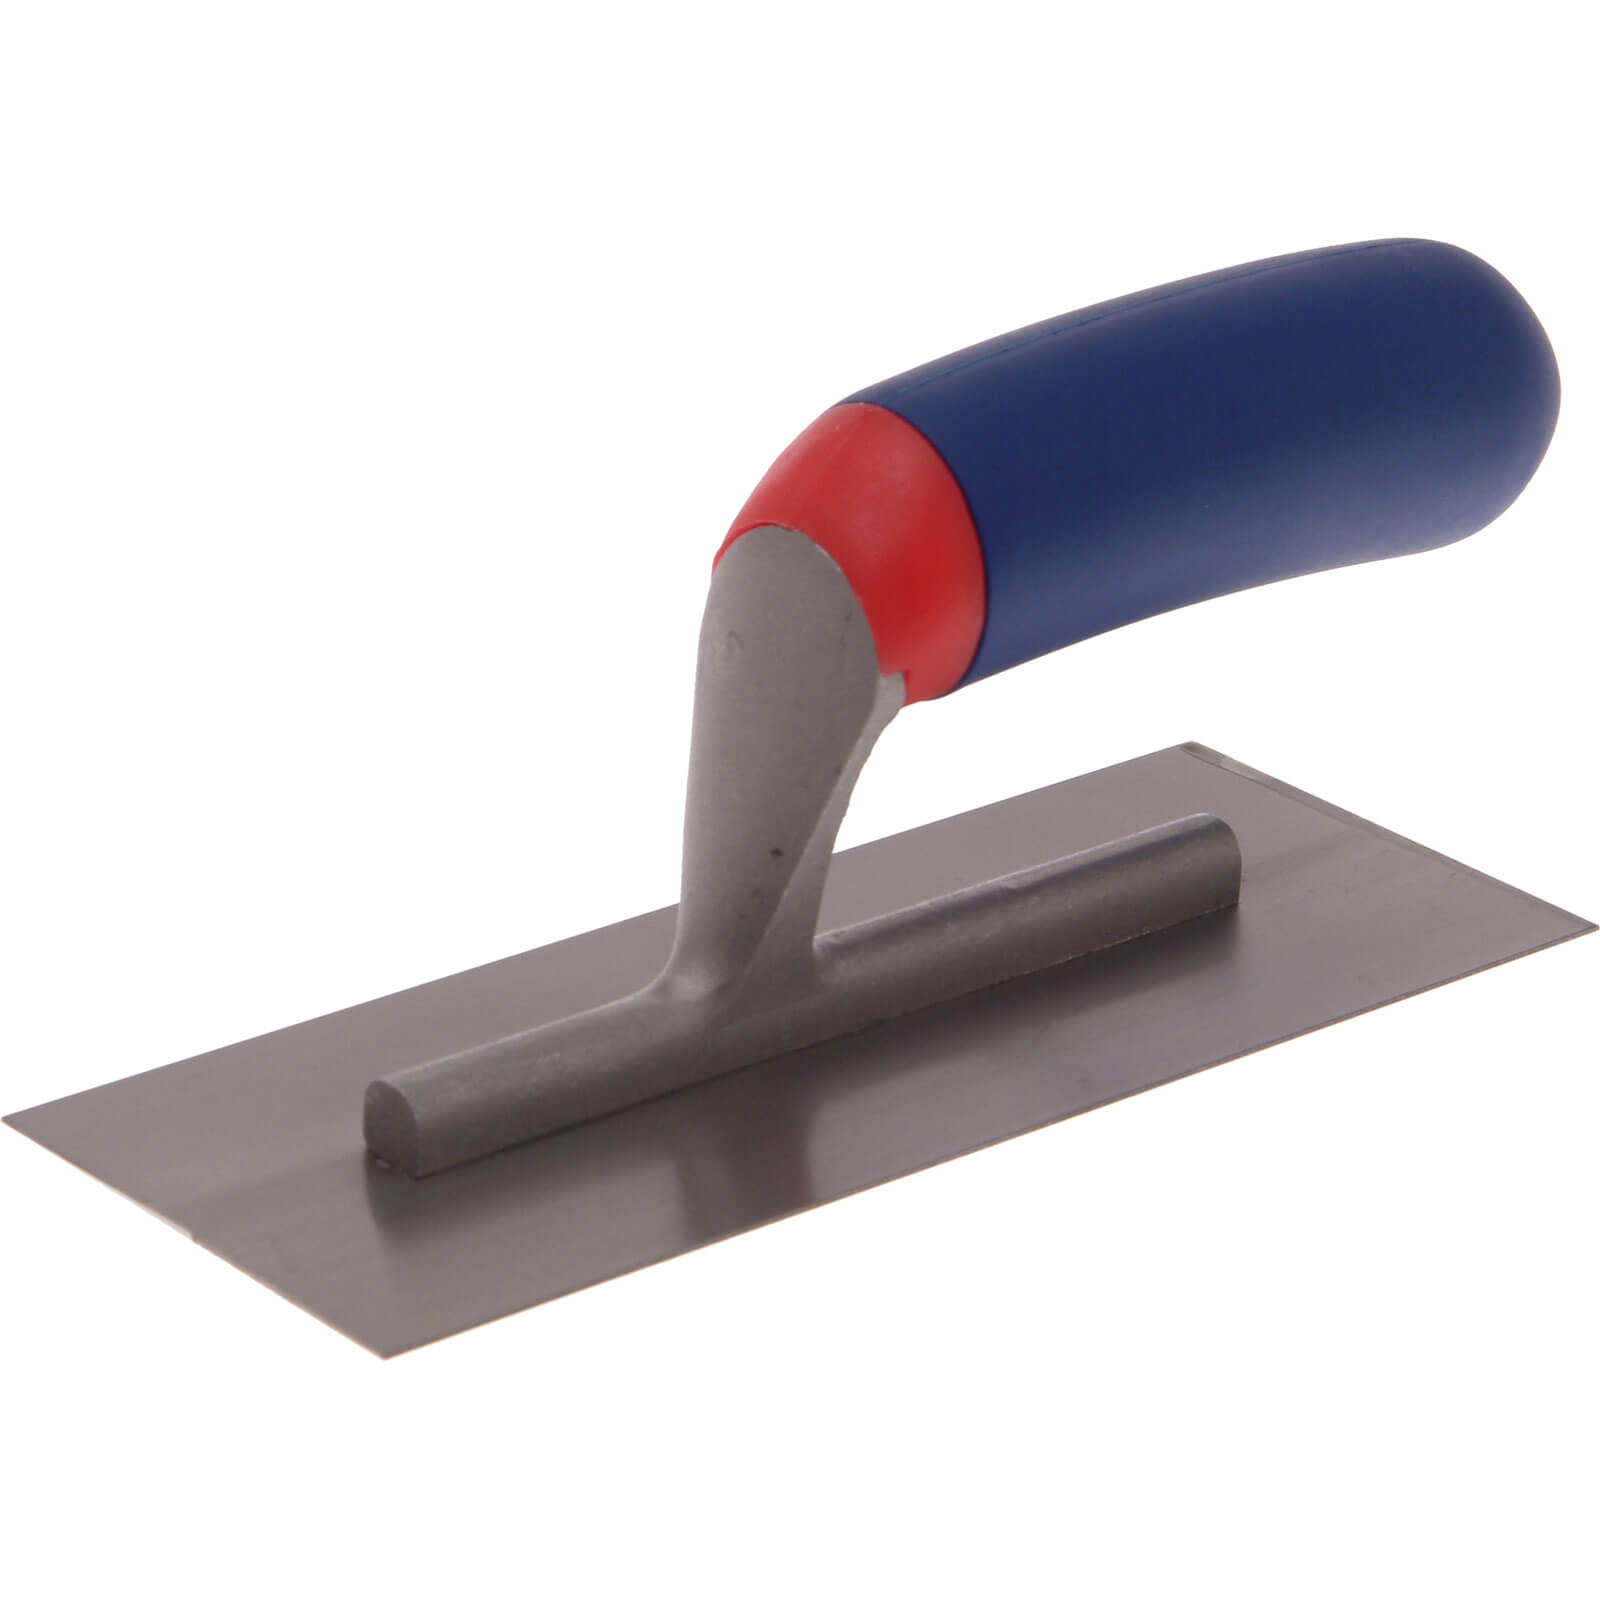 Photo of Rst Soft Touch Midget Trowel 7